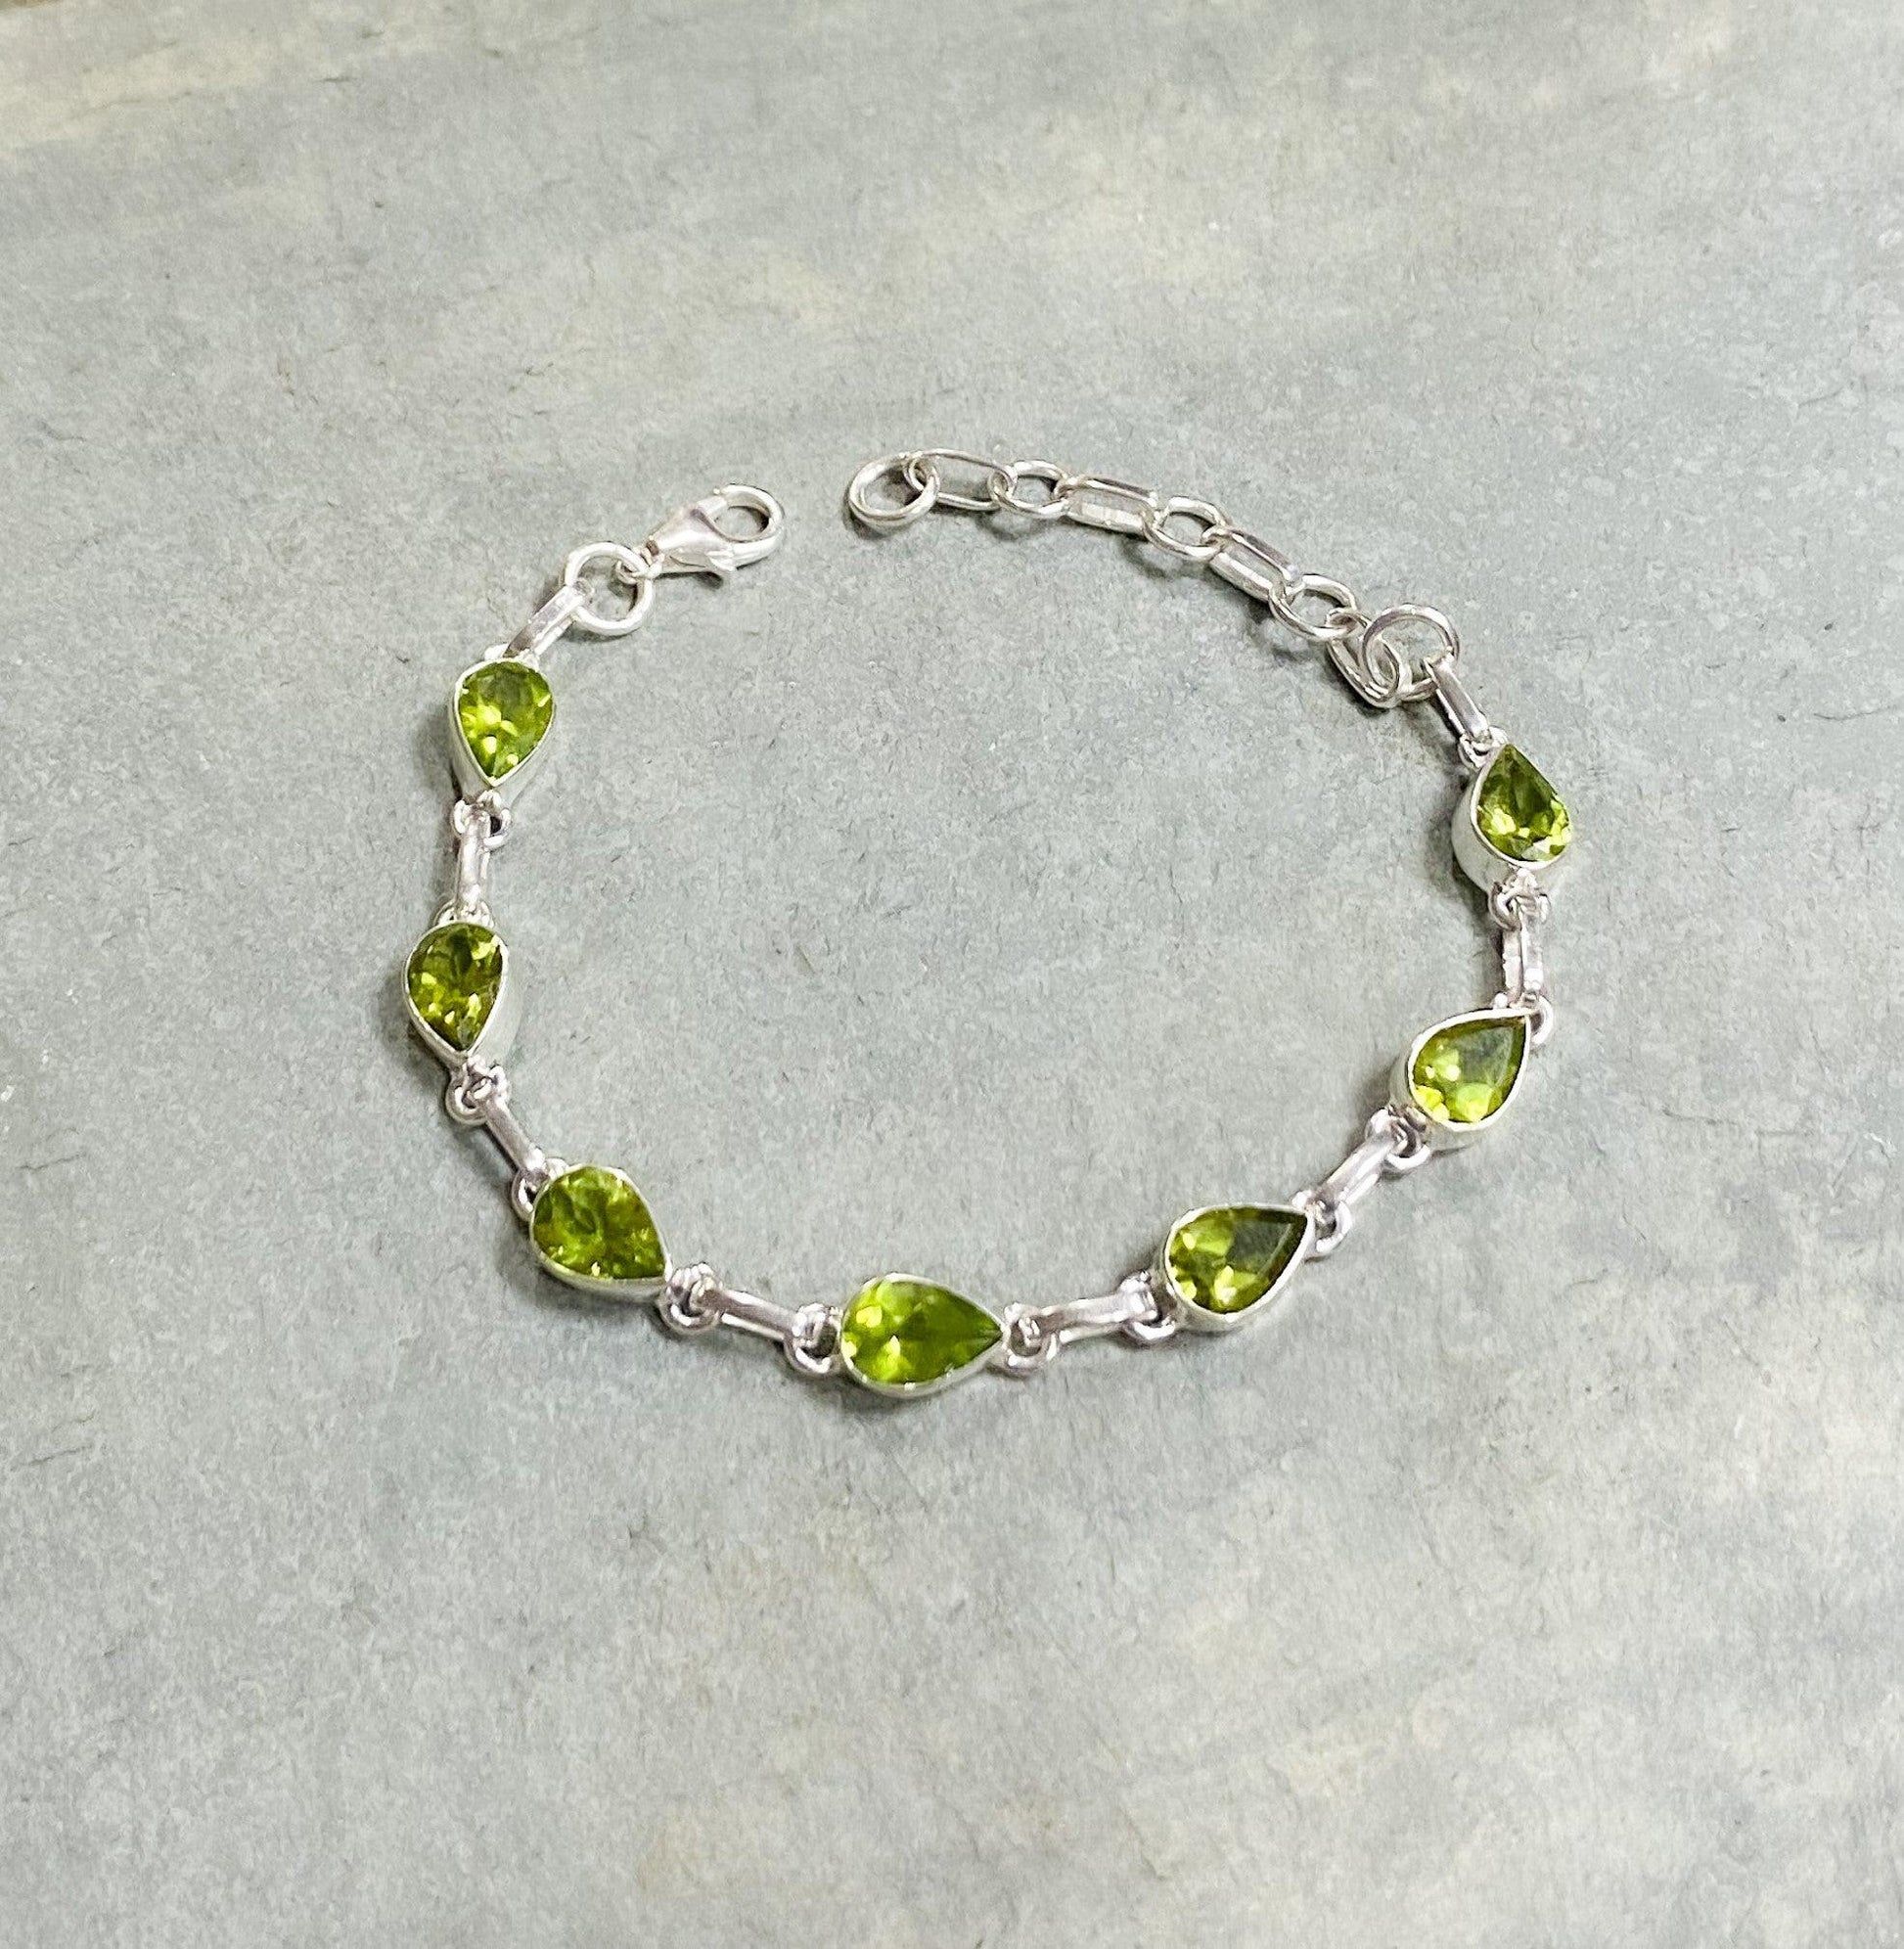 Sterling Bracelet With 7 Peridot Stones - Silver Parrot, Inc. 